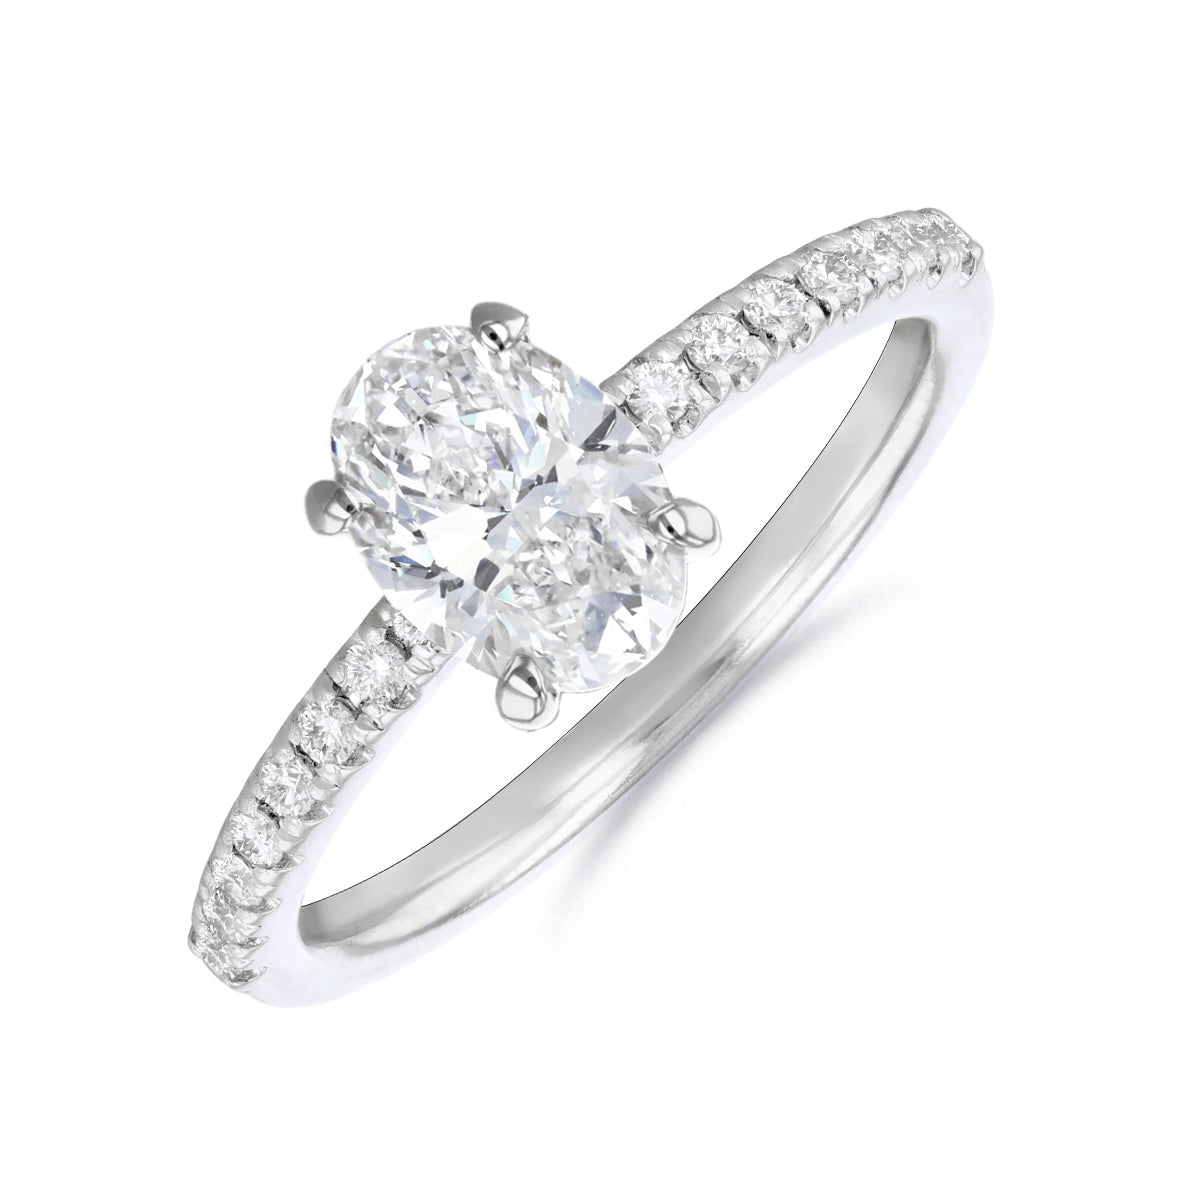 1.00ct Poppy Shoulder Set Oval Cut Diamond Solitaire Engagement Ring | 18ct Yellow Gold